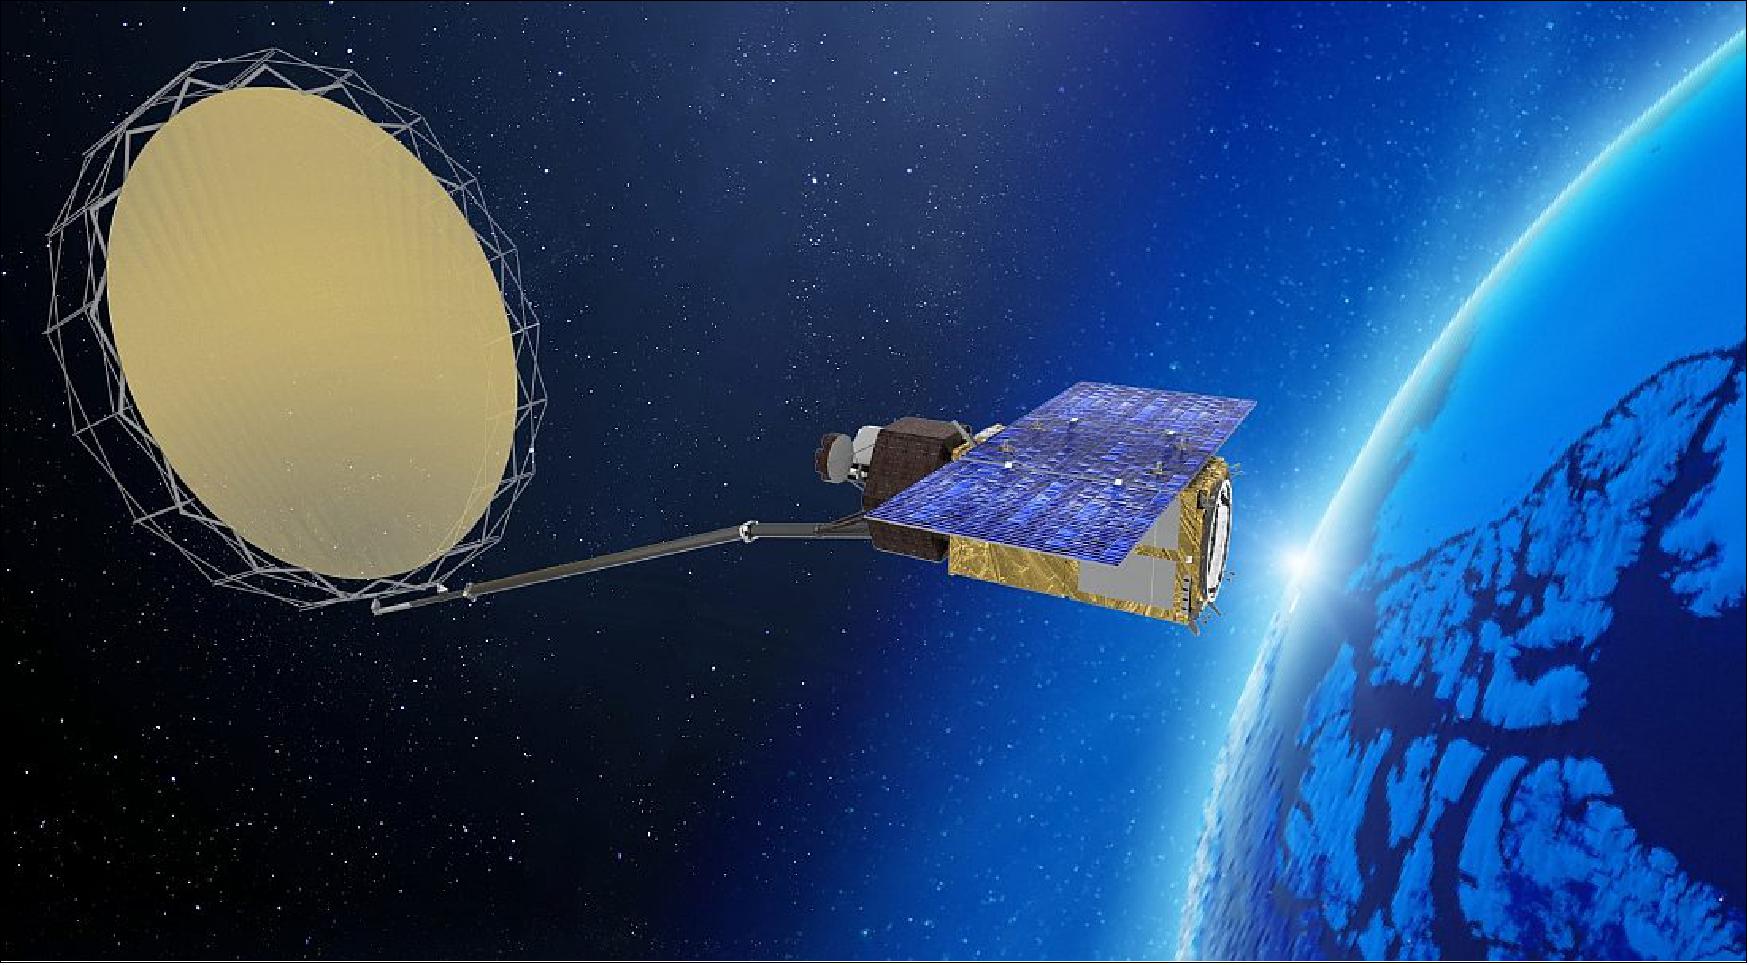 Figure 2: "Our strong expertise and heritage on both Copernicus programs and radar technologies will serve this mission which is considered essential to the successful implementation of the integrated EU Arctic Policy", declared Hervé Derrey, CEO of Thales Alenia Space (image credit: TAS)